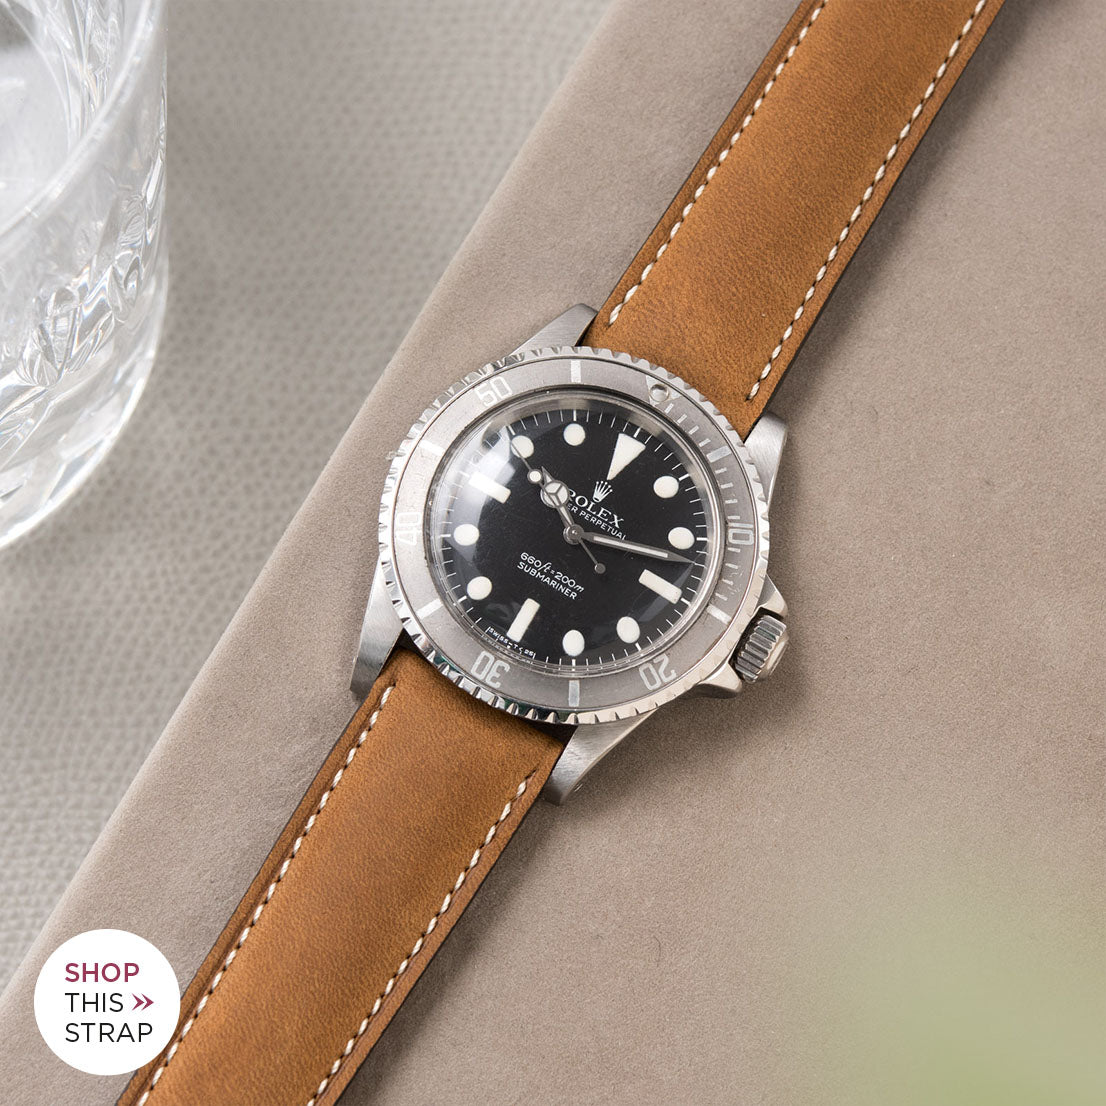 Bulang and Sons_Strap Guide_The Rolex 5513 Faded Maxi Submariner_Mountain Brown Leather Watch Strap